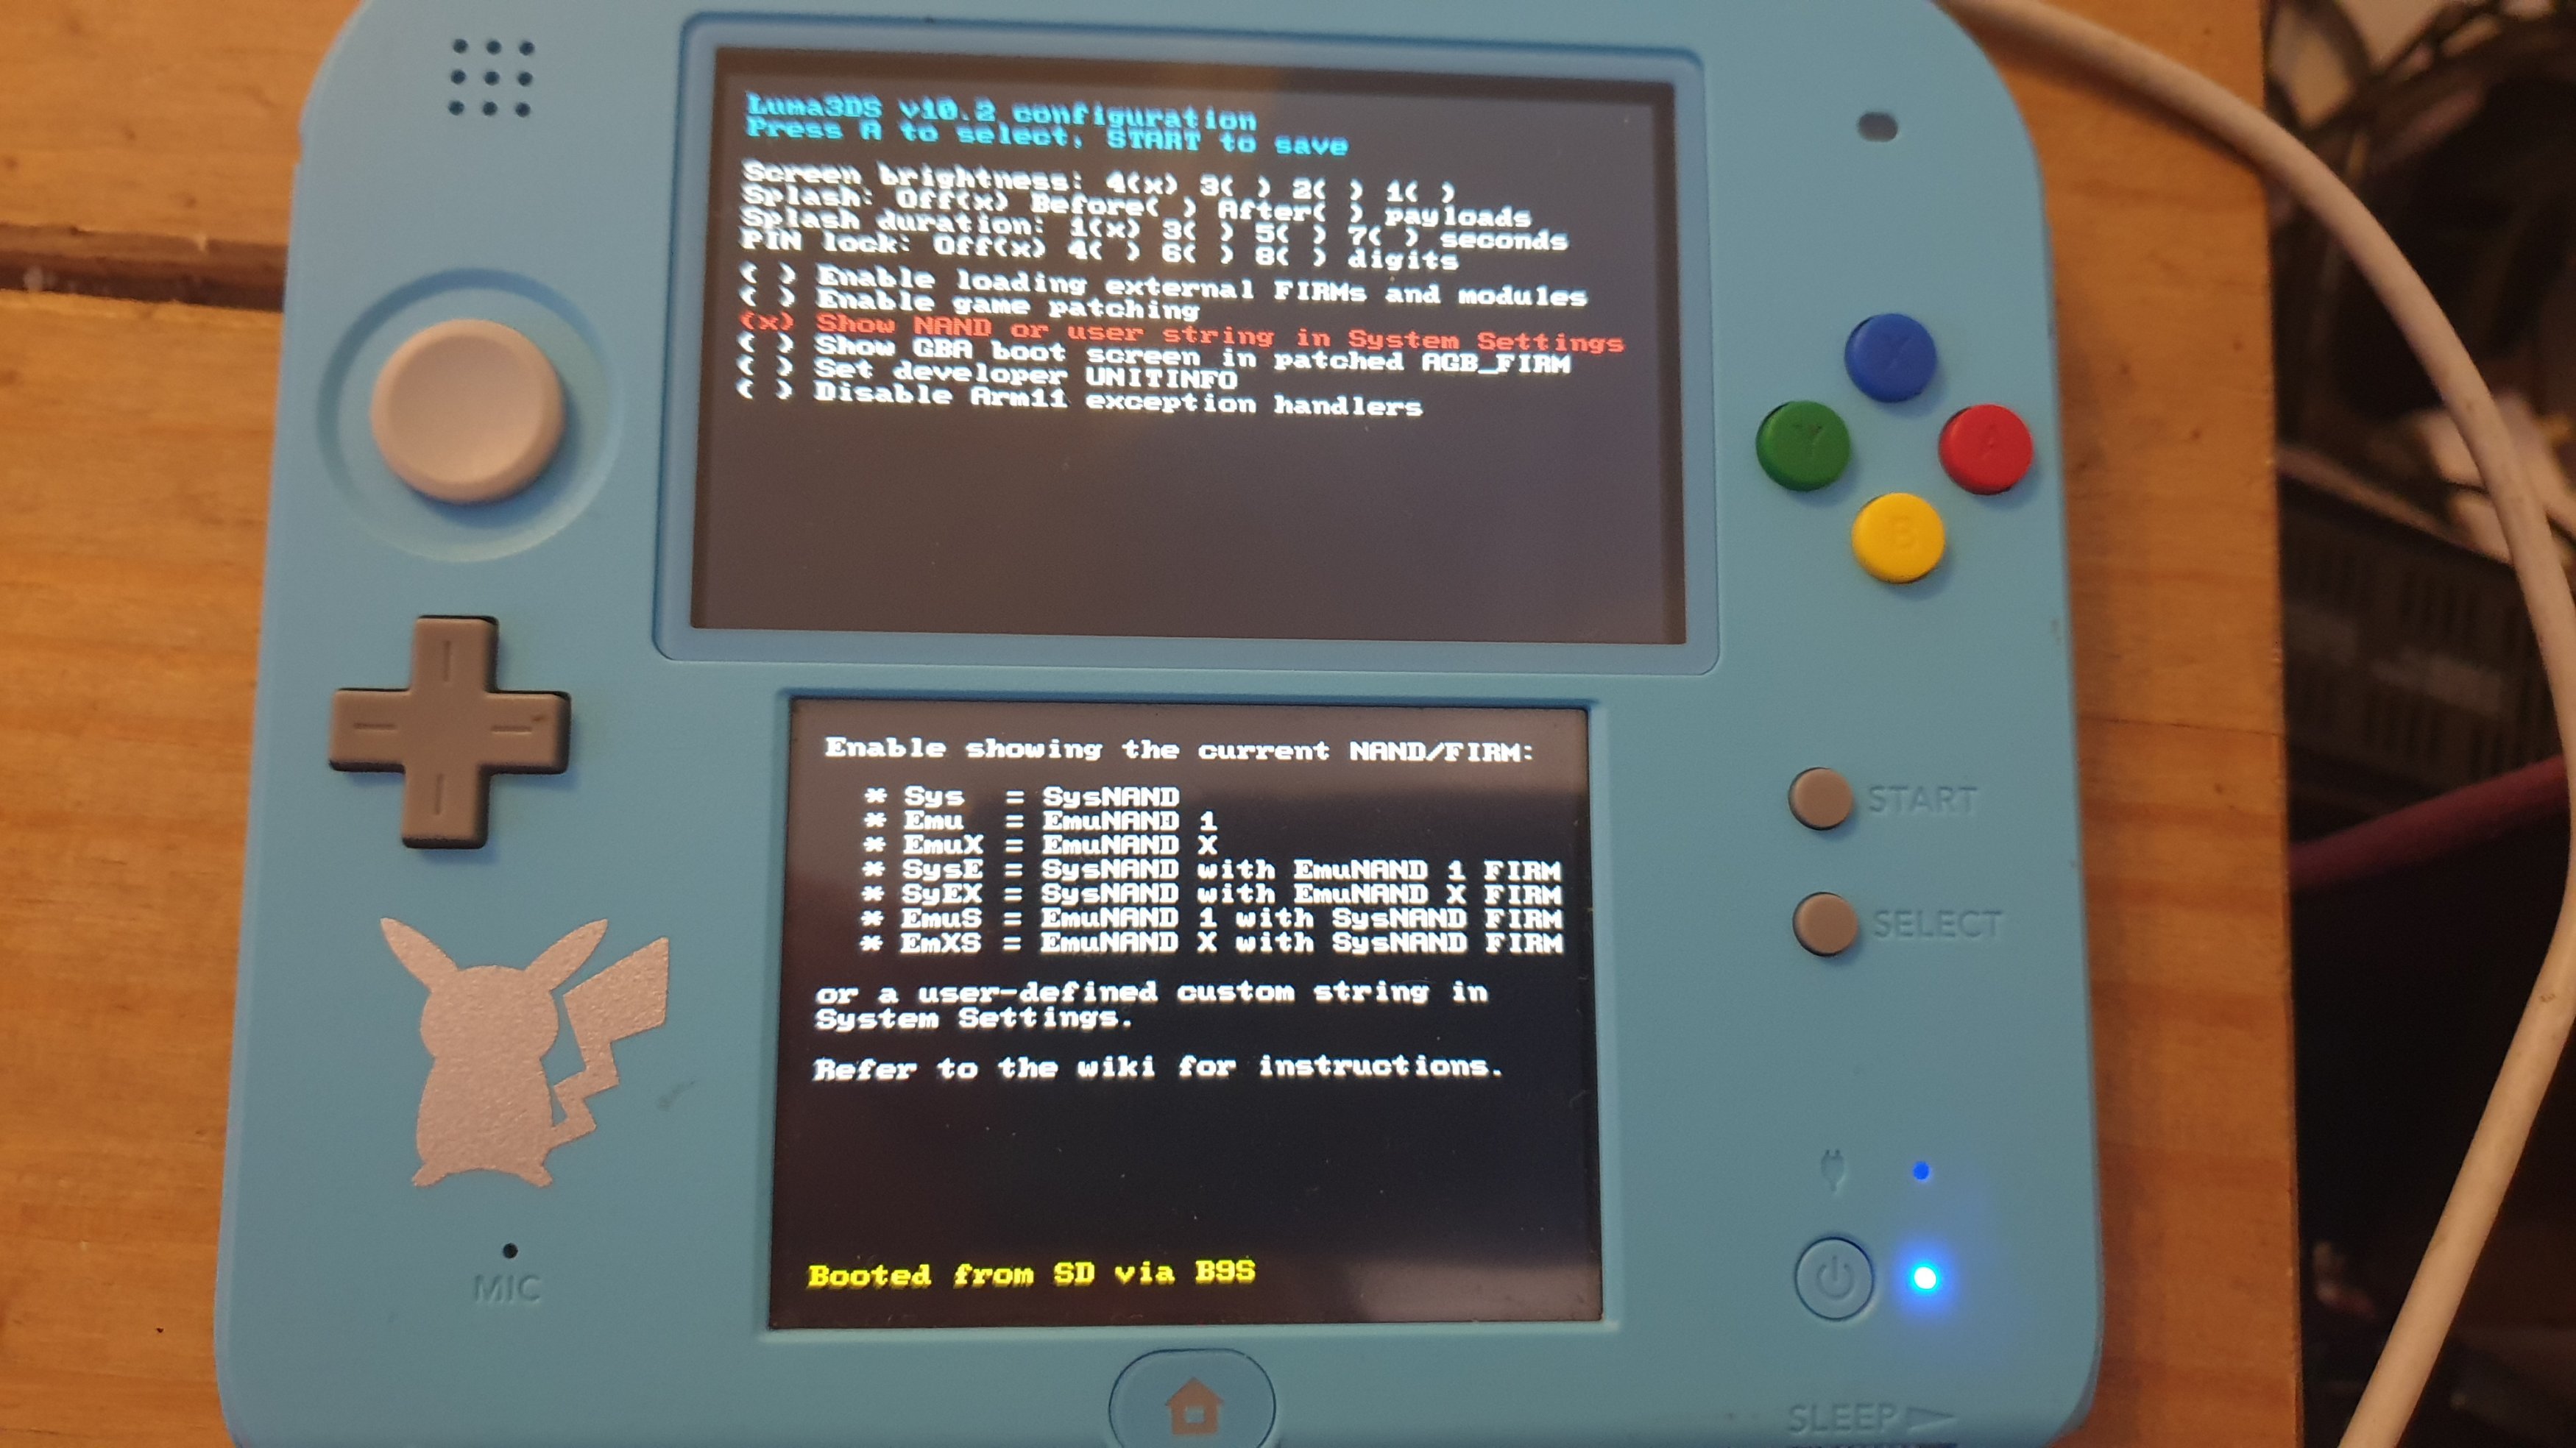 Bricked my 30ds using browserhax, can I reset and start again